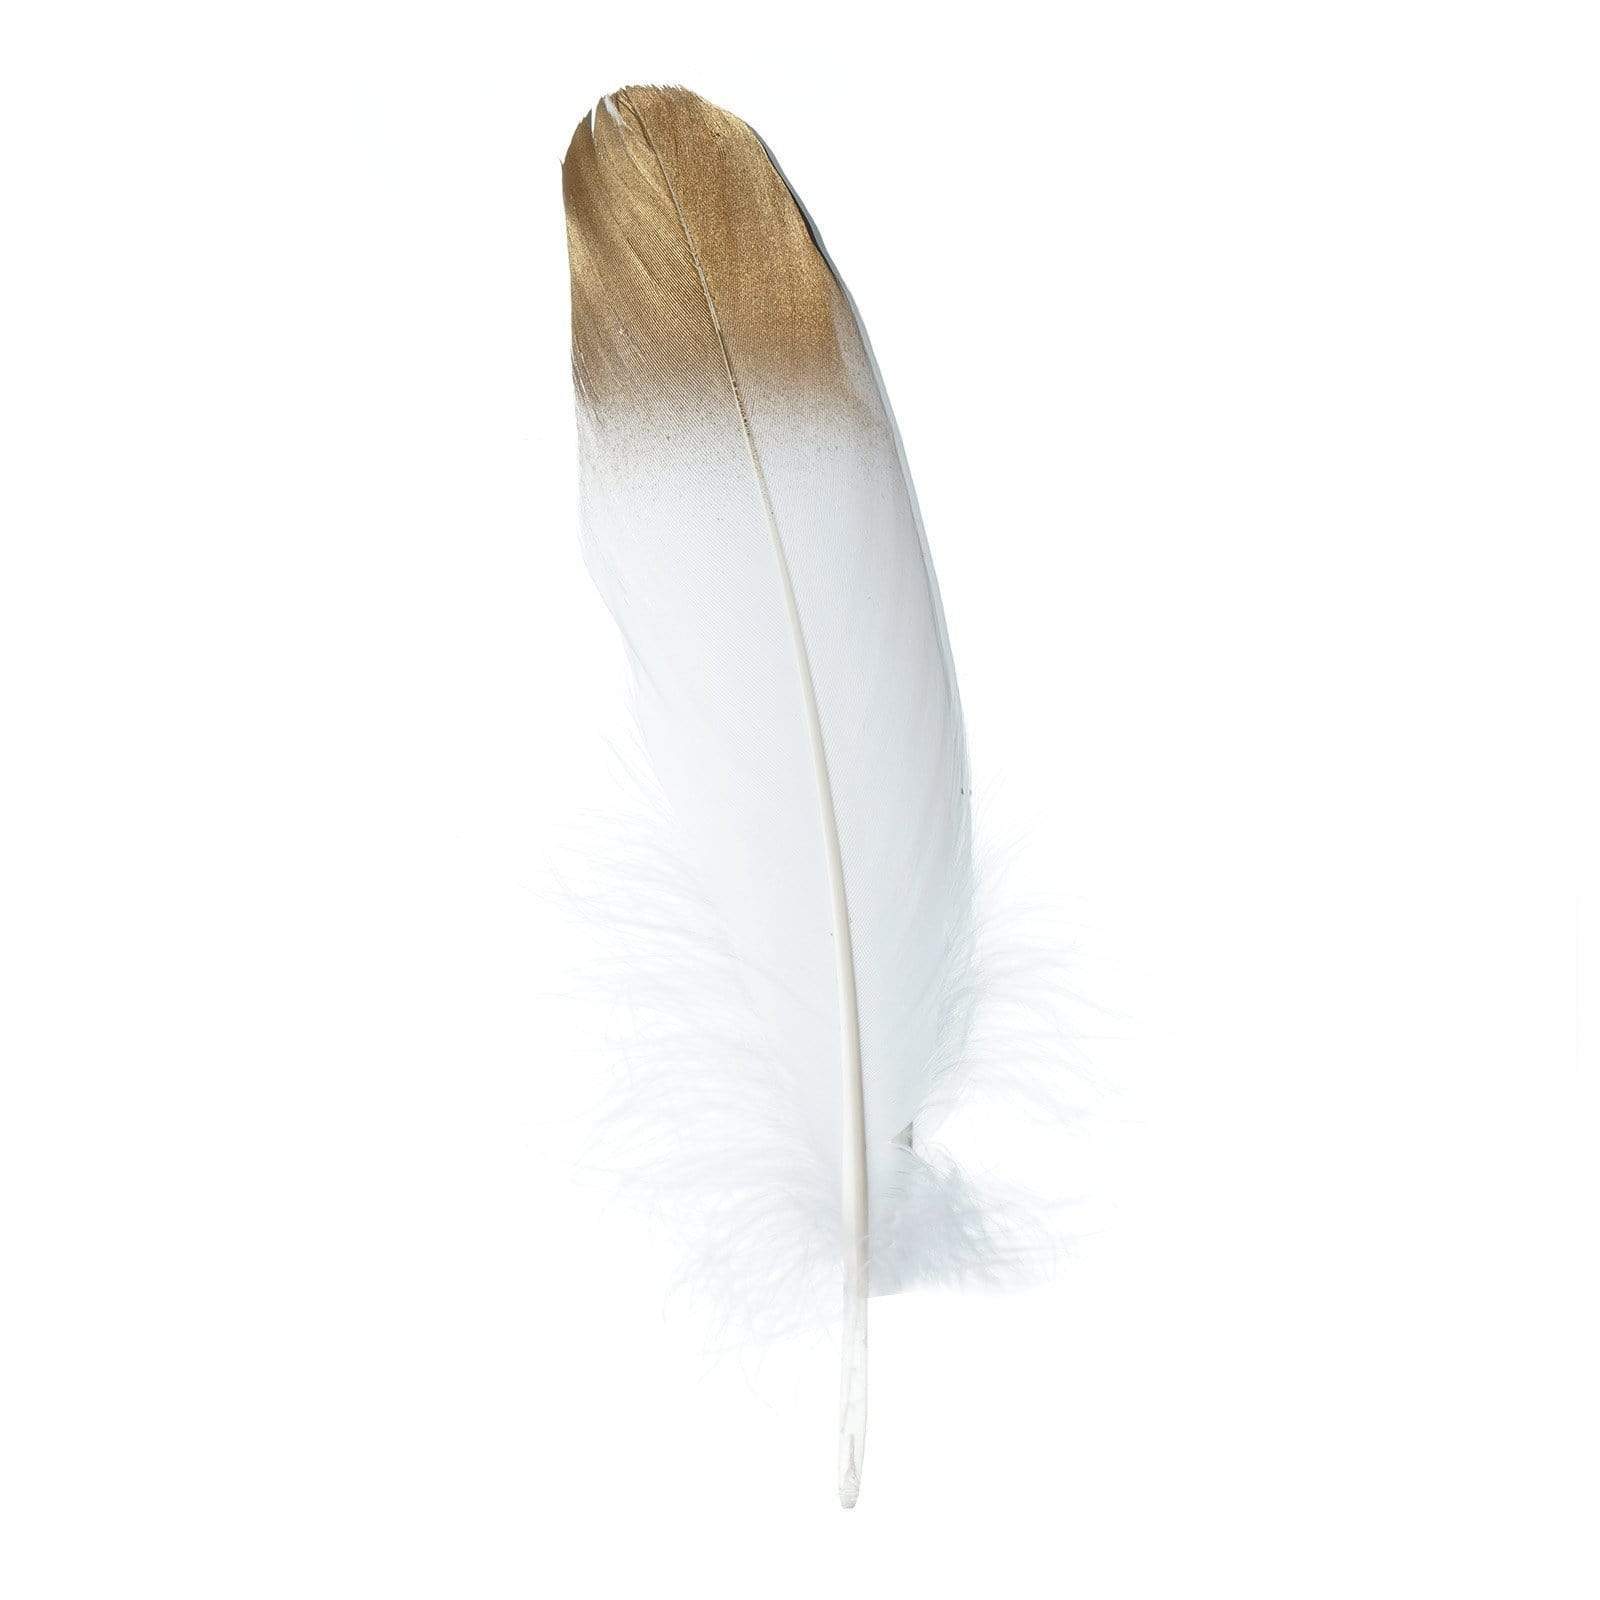 30 pcs Metallic Gold Tip Natural Goose Feathers OST_LEAF02G_WHT